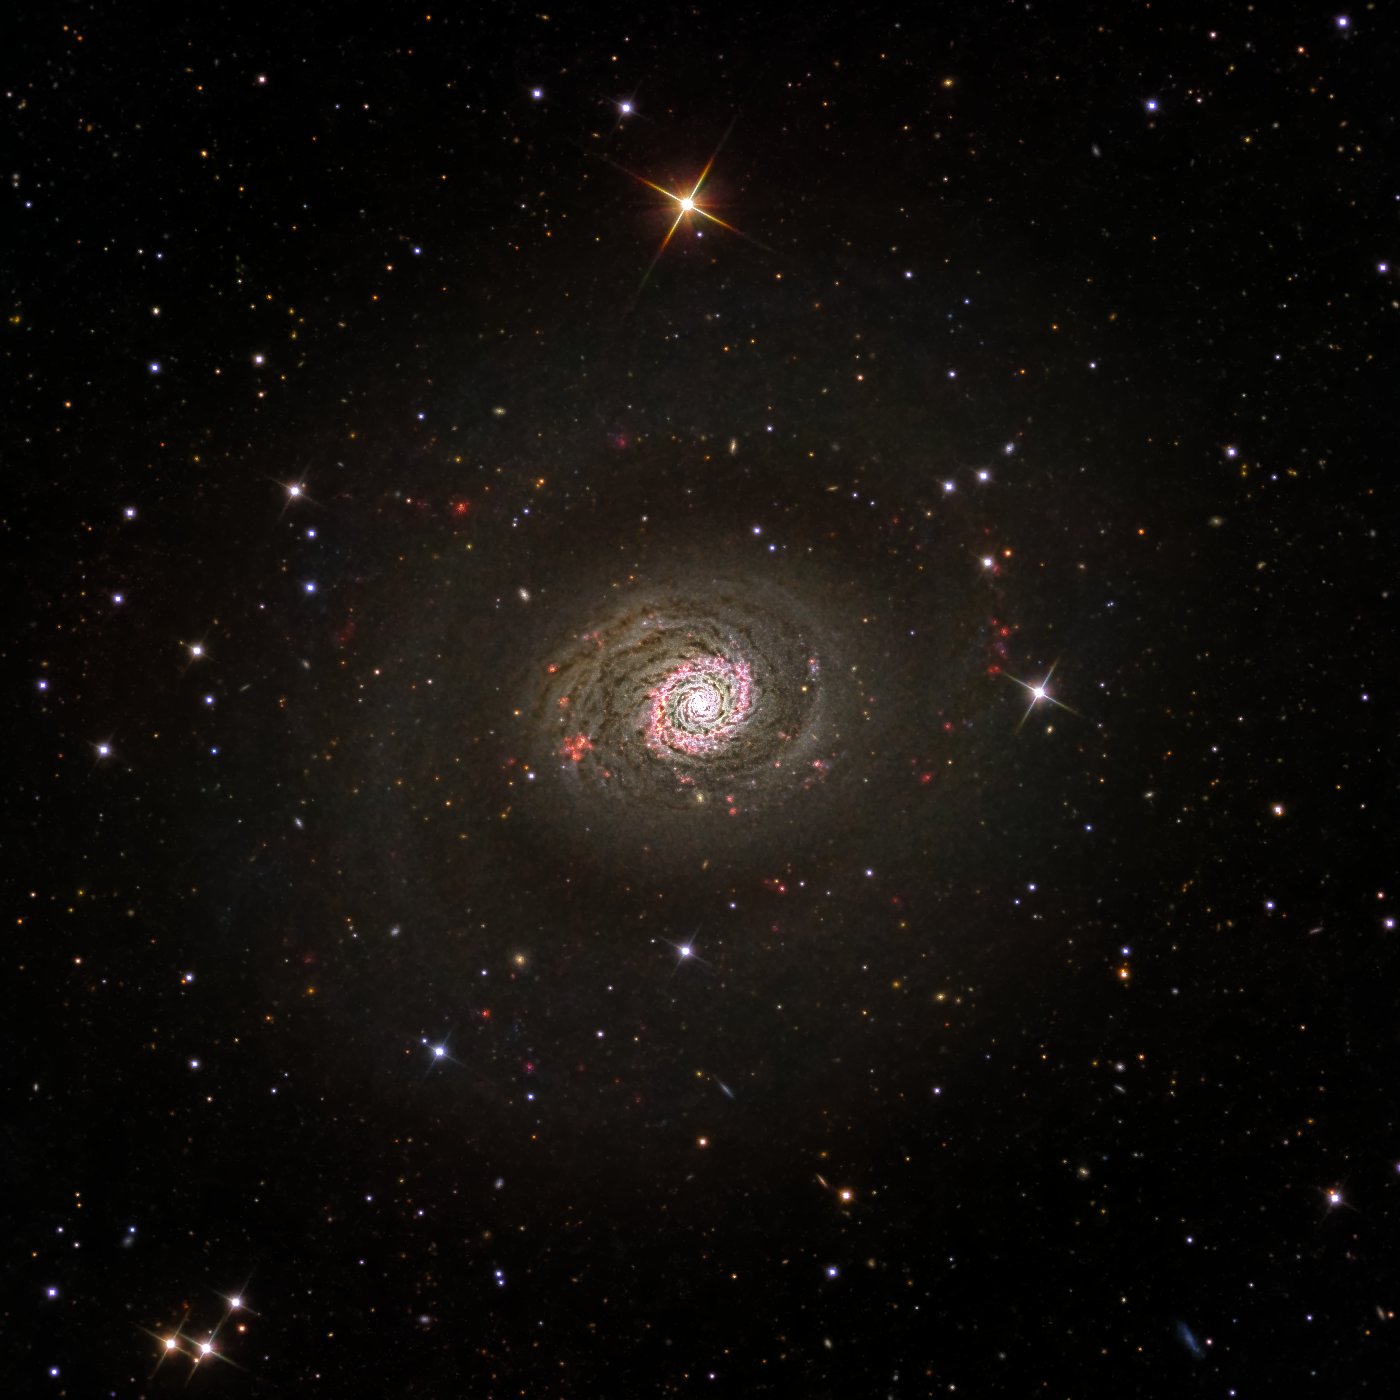 M94 in H-alpha and continuum light